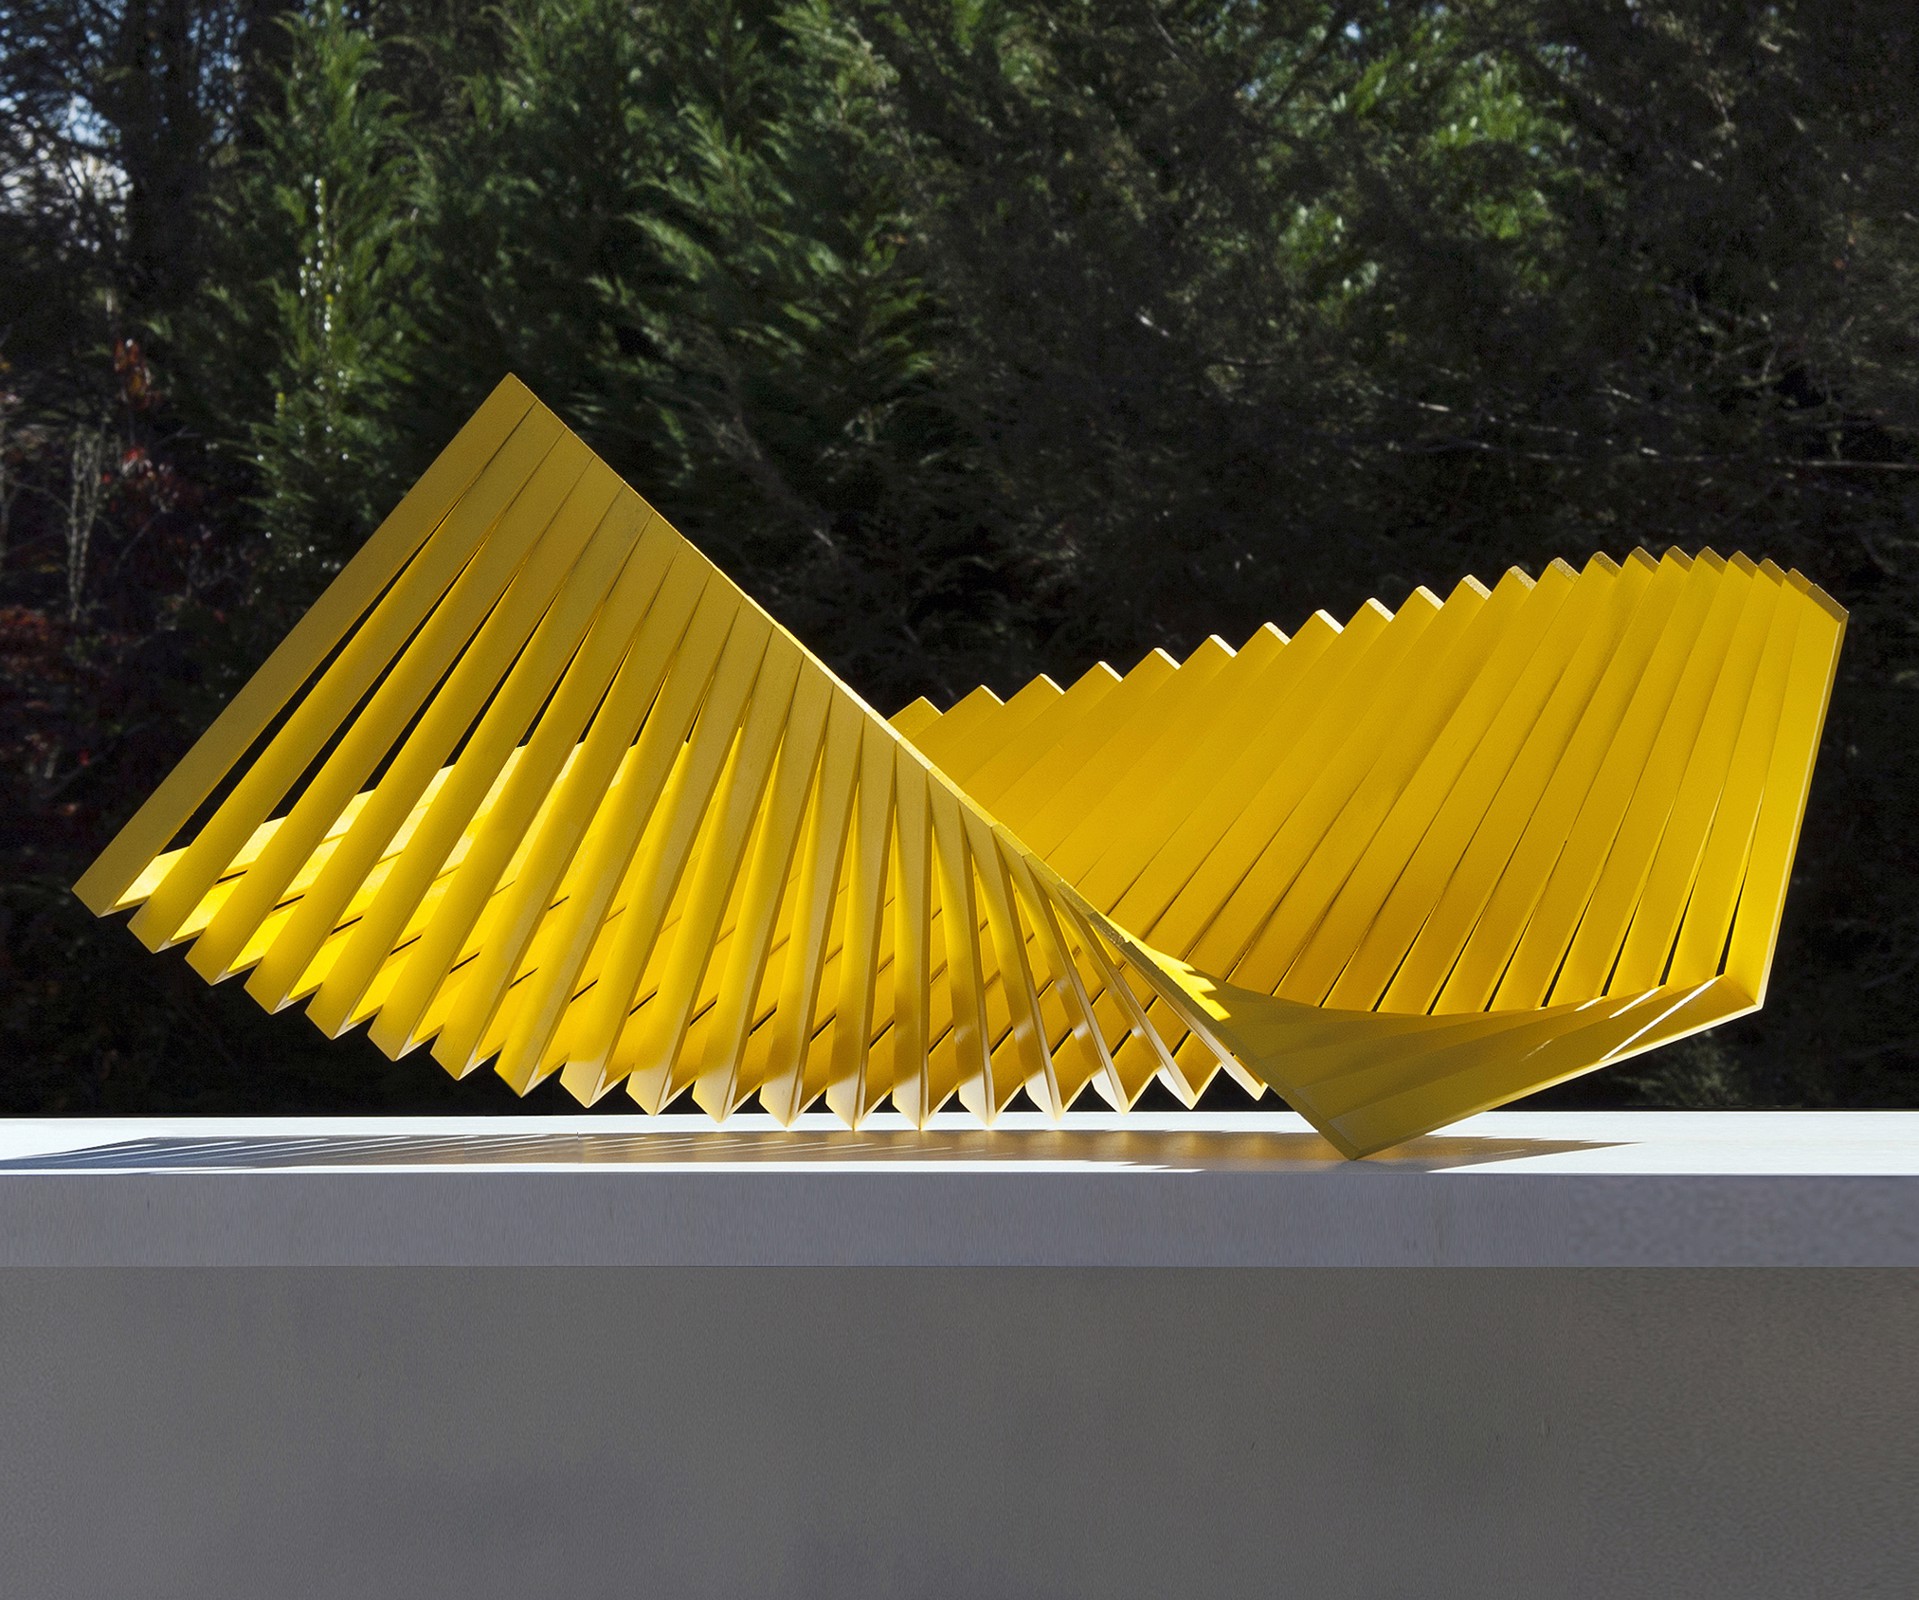 Untitled Yellow Maquette by Robert Winkler